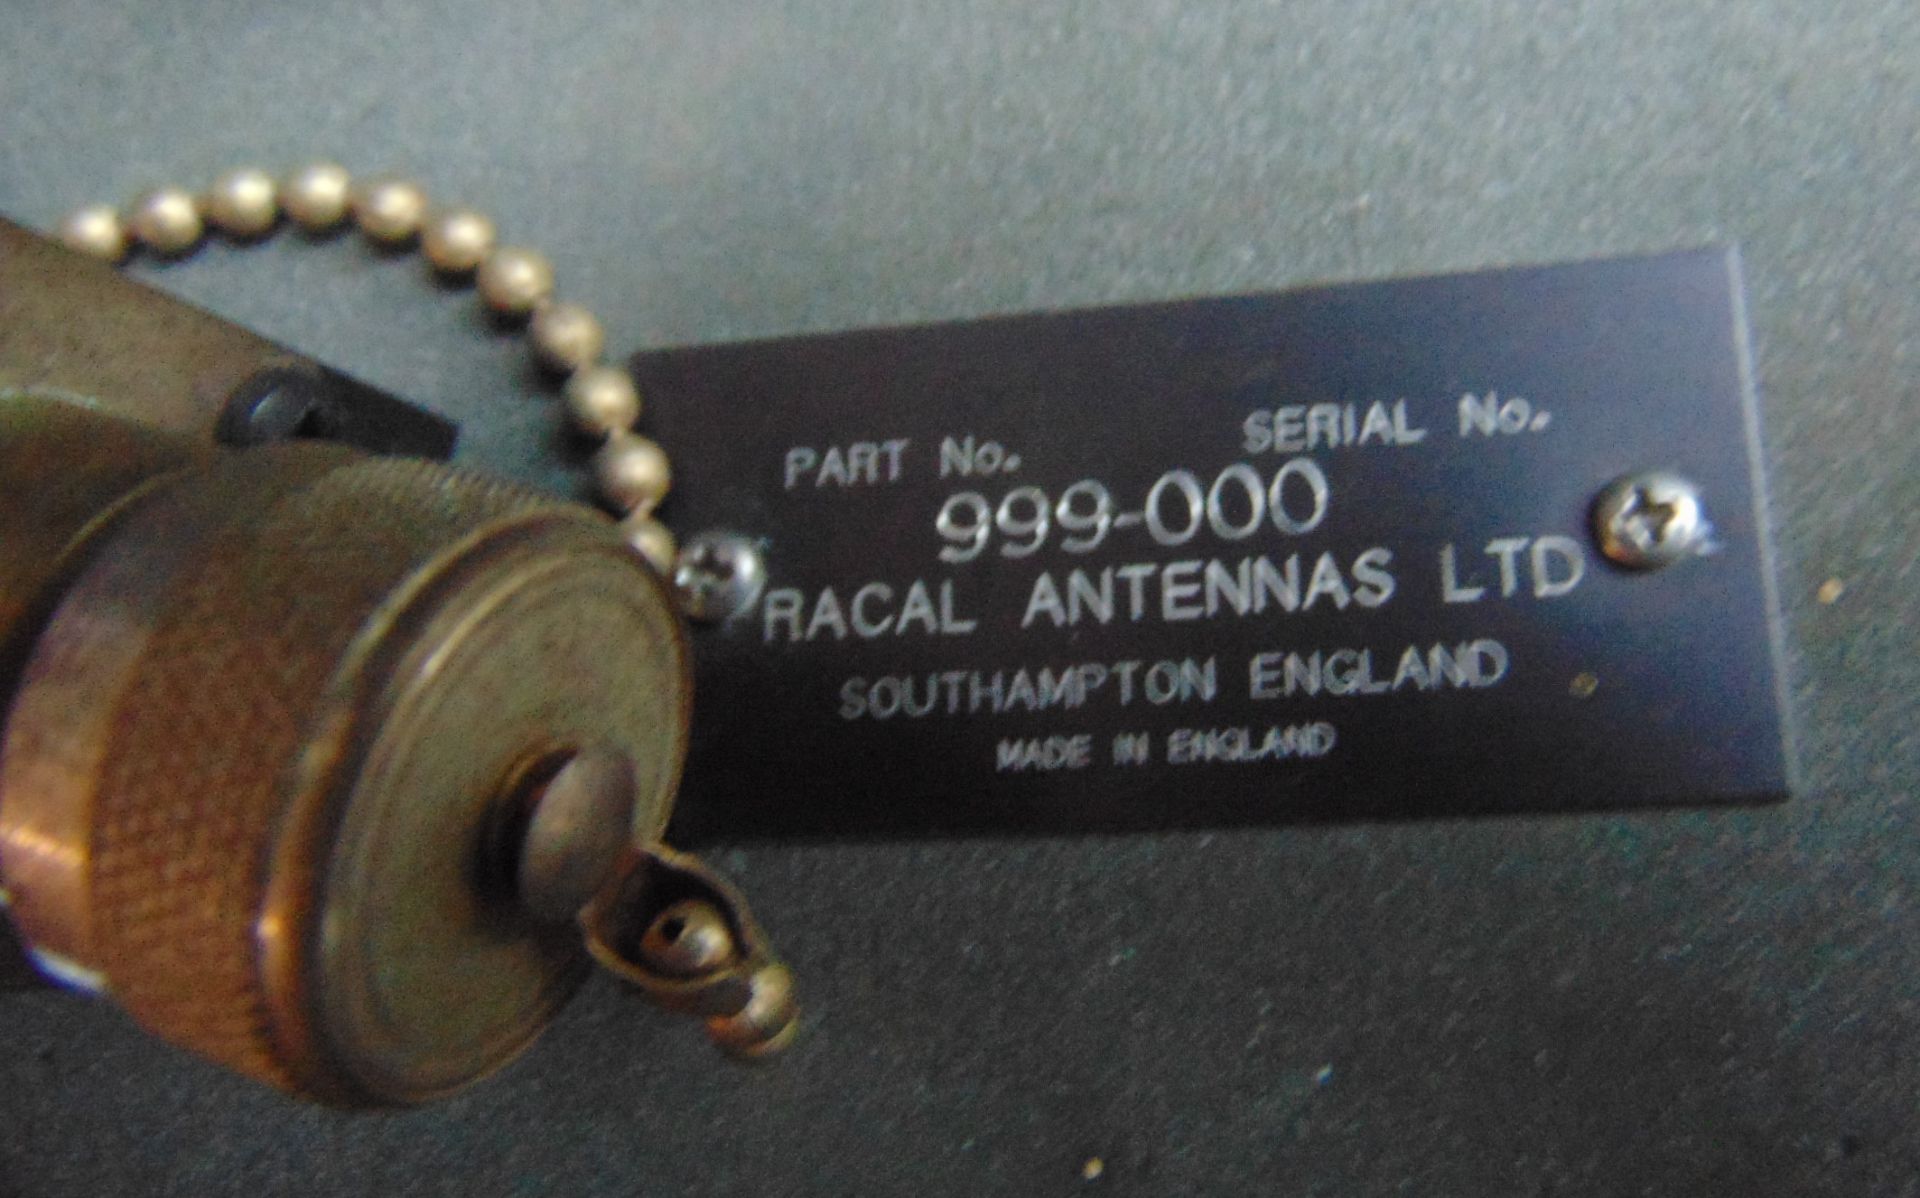 Racal Antenna as shown - Image 3 of 3